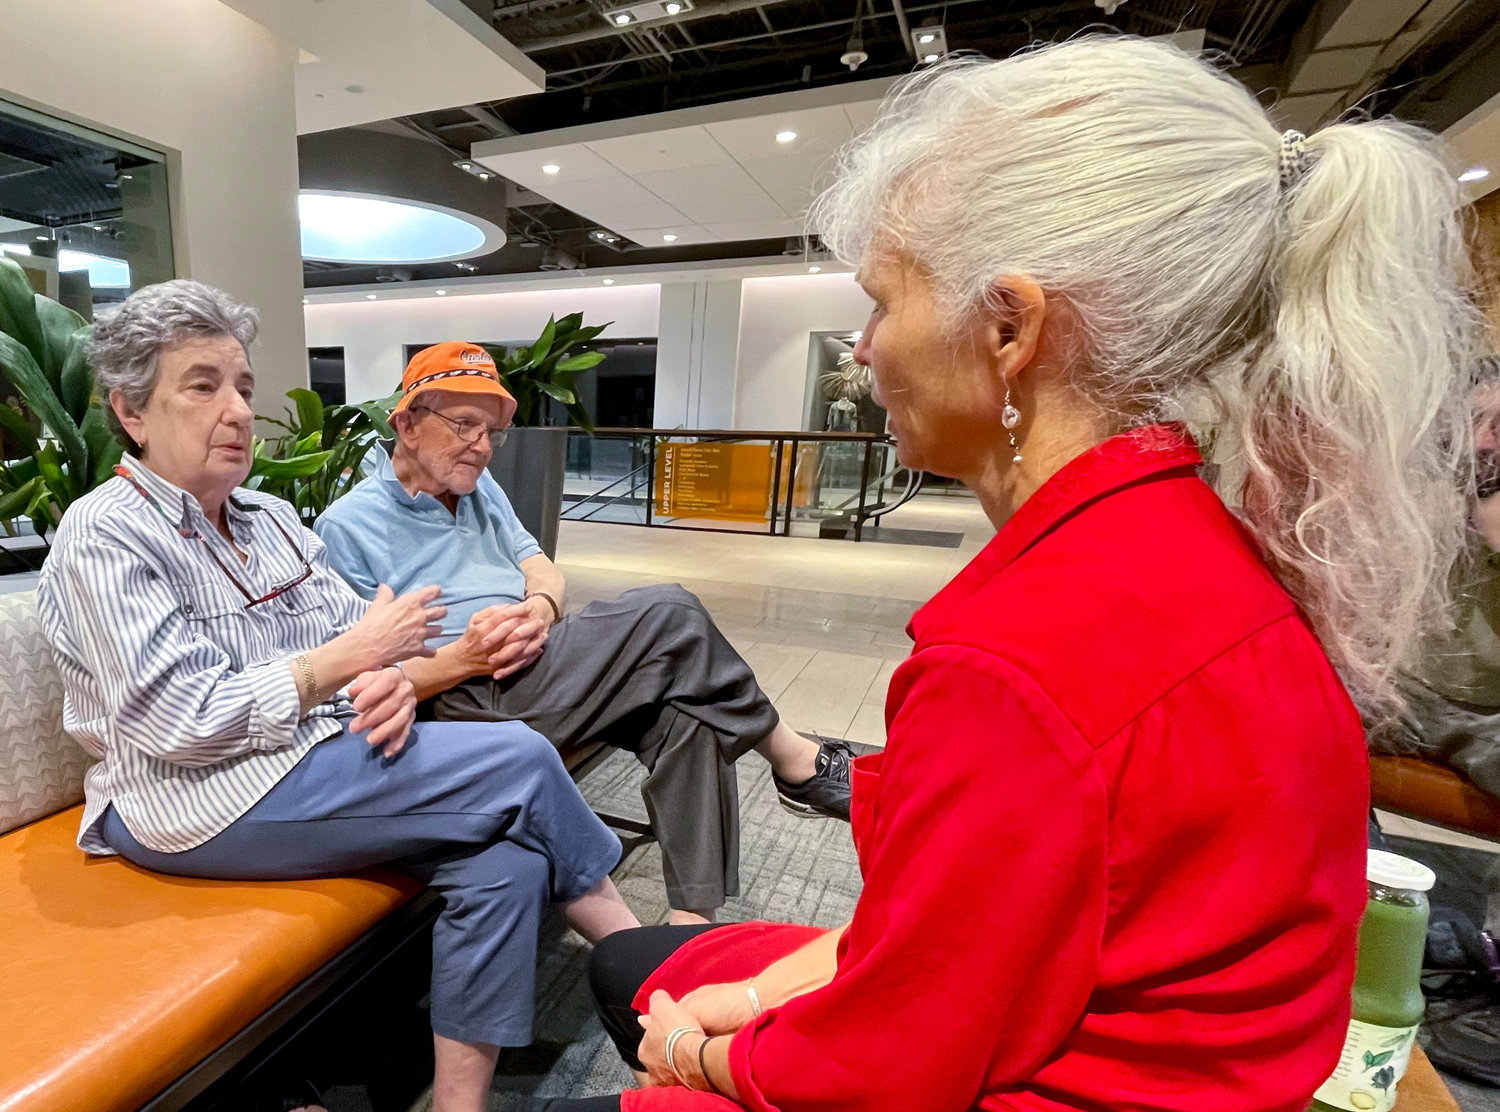 Roz and Nelson Hyman, left, talk with their friend Elizabeth Grove at a shopping complex in Towson, Md., Sept. 18, 2022. The Hymans are Democrats who say President Joe Biden's age, 80 on Sunday, isn't a concern for them if he decides to run for another term. The oldest president in U.S. history has a record as a campaign winner and has posted major legislative successes in recent months. But surveys of voters point to concern about his capabilities.